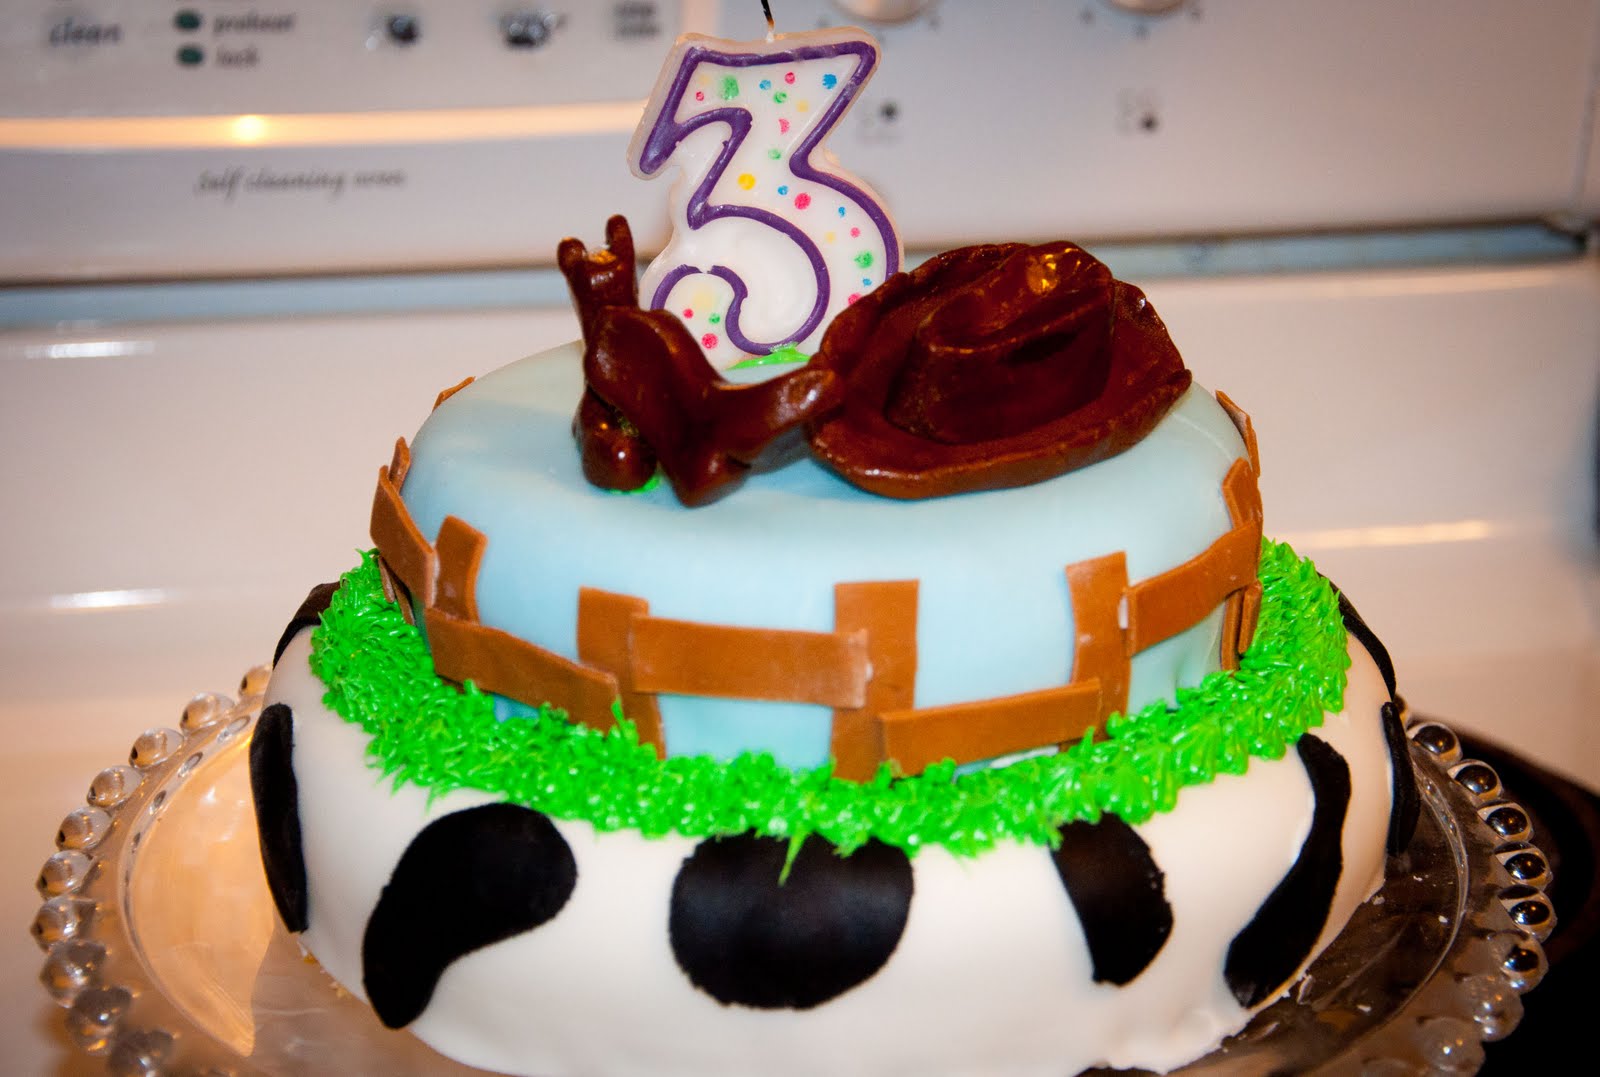 C's 3rd birthday cake - Housewives of Riverton